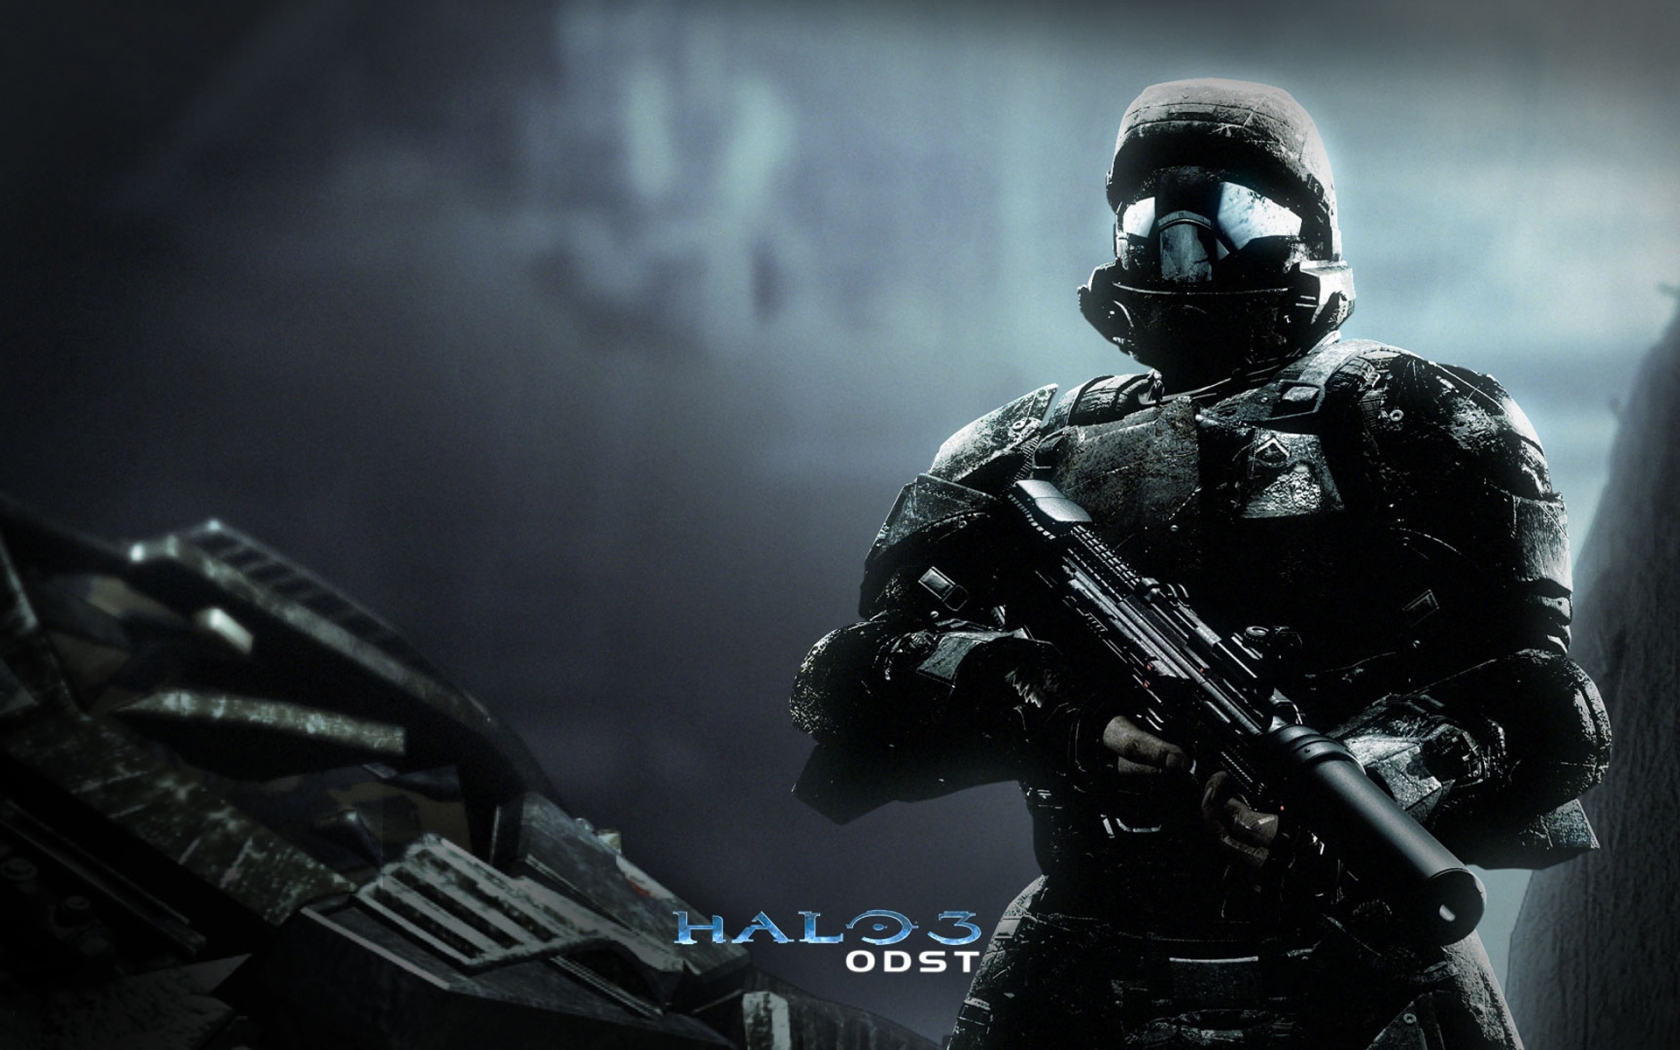 Halo 3 ODST for 1680 x 1050 widescreen resolution